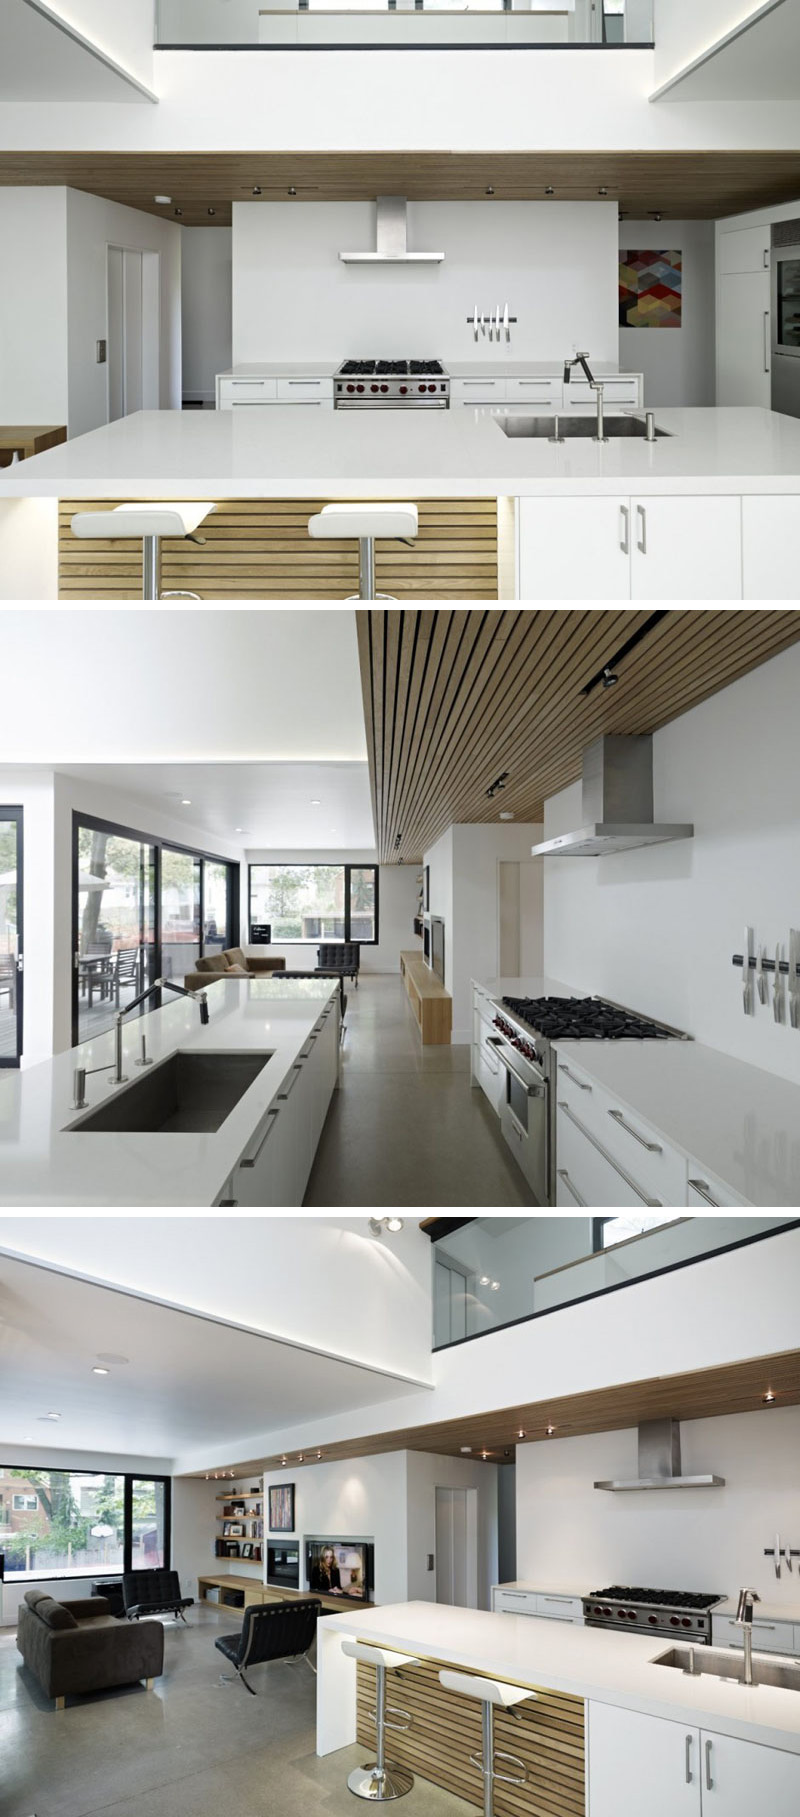 In this modern kitchen a long white island with wood accents has a built-in sink and plenty of storage. Above the stove, a slat wood accent feature in the ceiling with lighting continues into the living room.